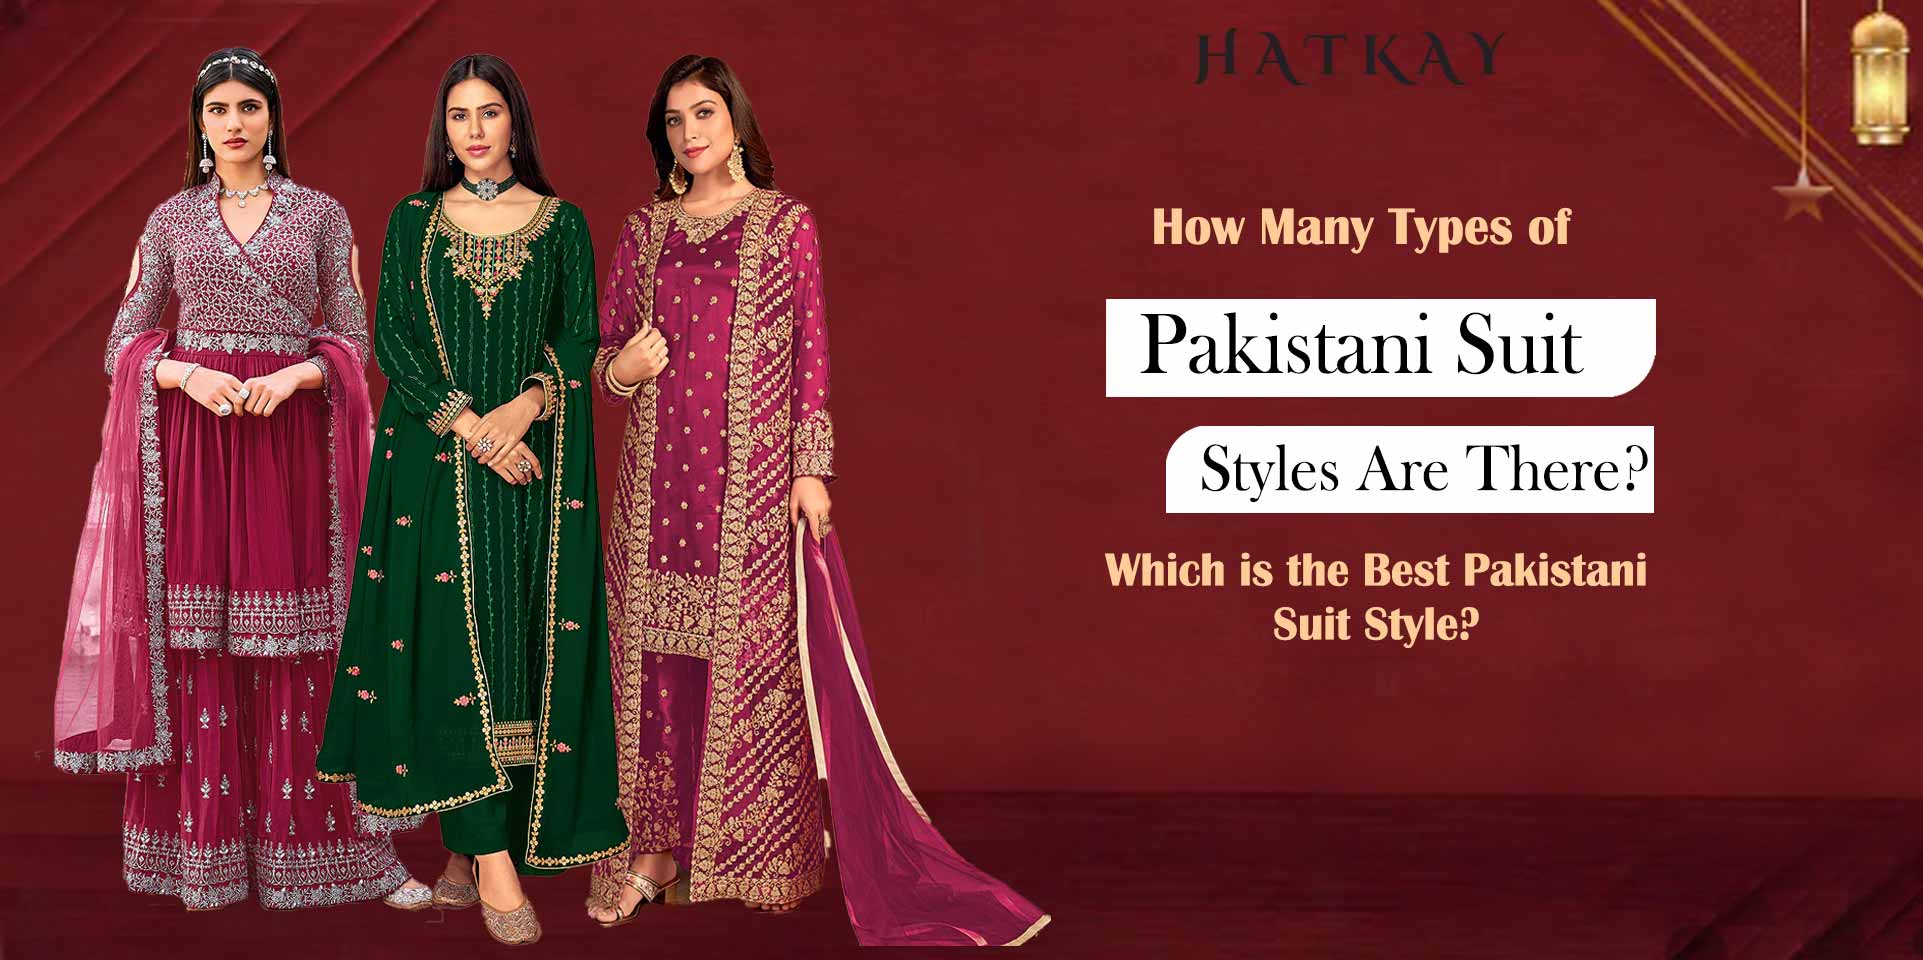 How Many Types of Pakistani Suit Styles are There? Which is the Best Pakistani Suit Style?